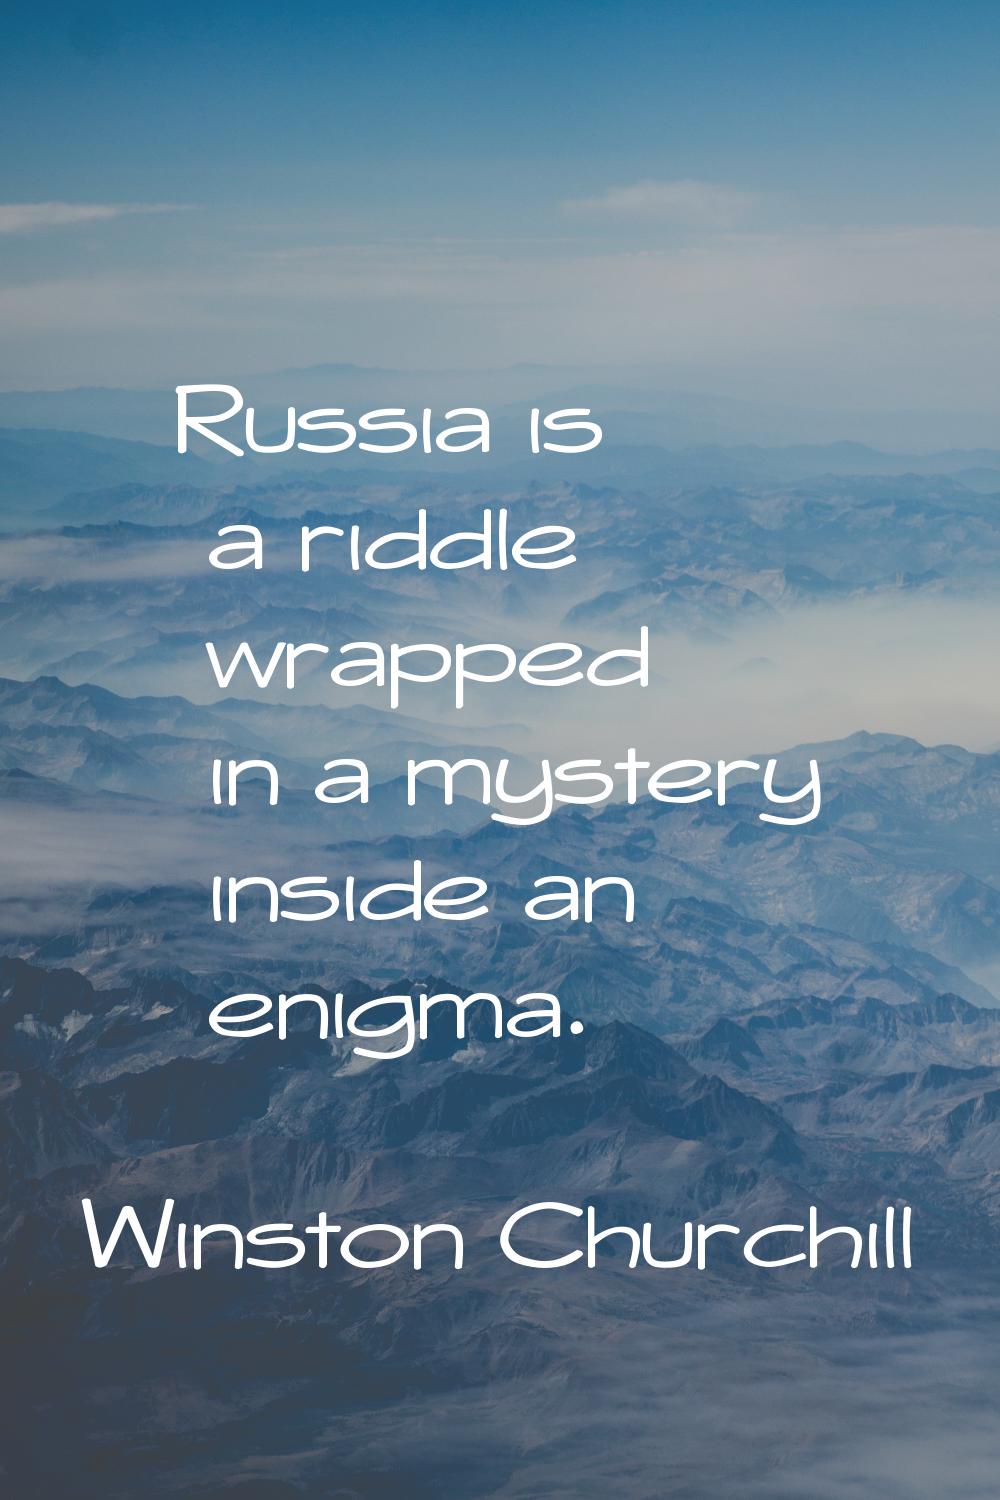 Russia is a riddle wrapped in a mystery inside an enigma.